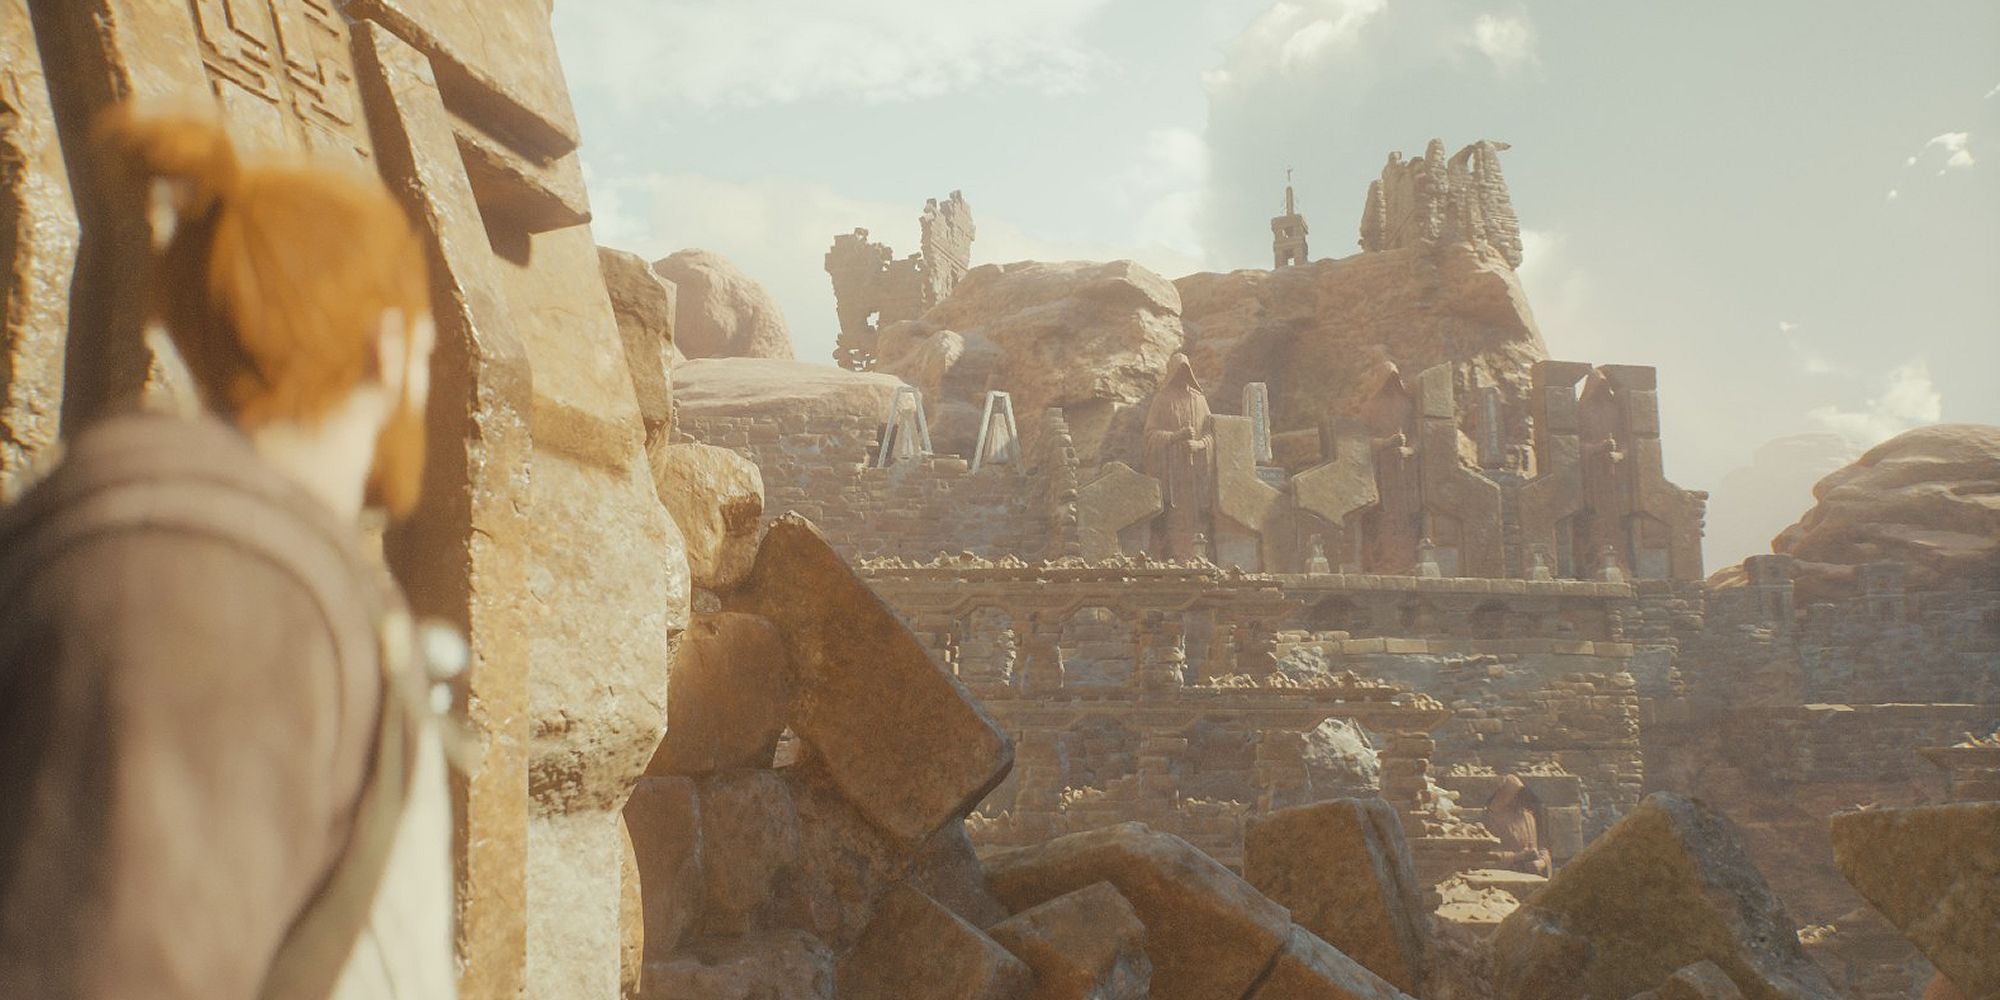 An image of Cal Kestis searching for perks on Jedha, a planet in Star Wars Jedi: Survivor. Jedha is a desert landscape filled with mysterious jedi ruins.